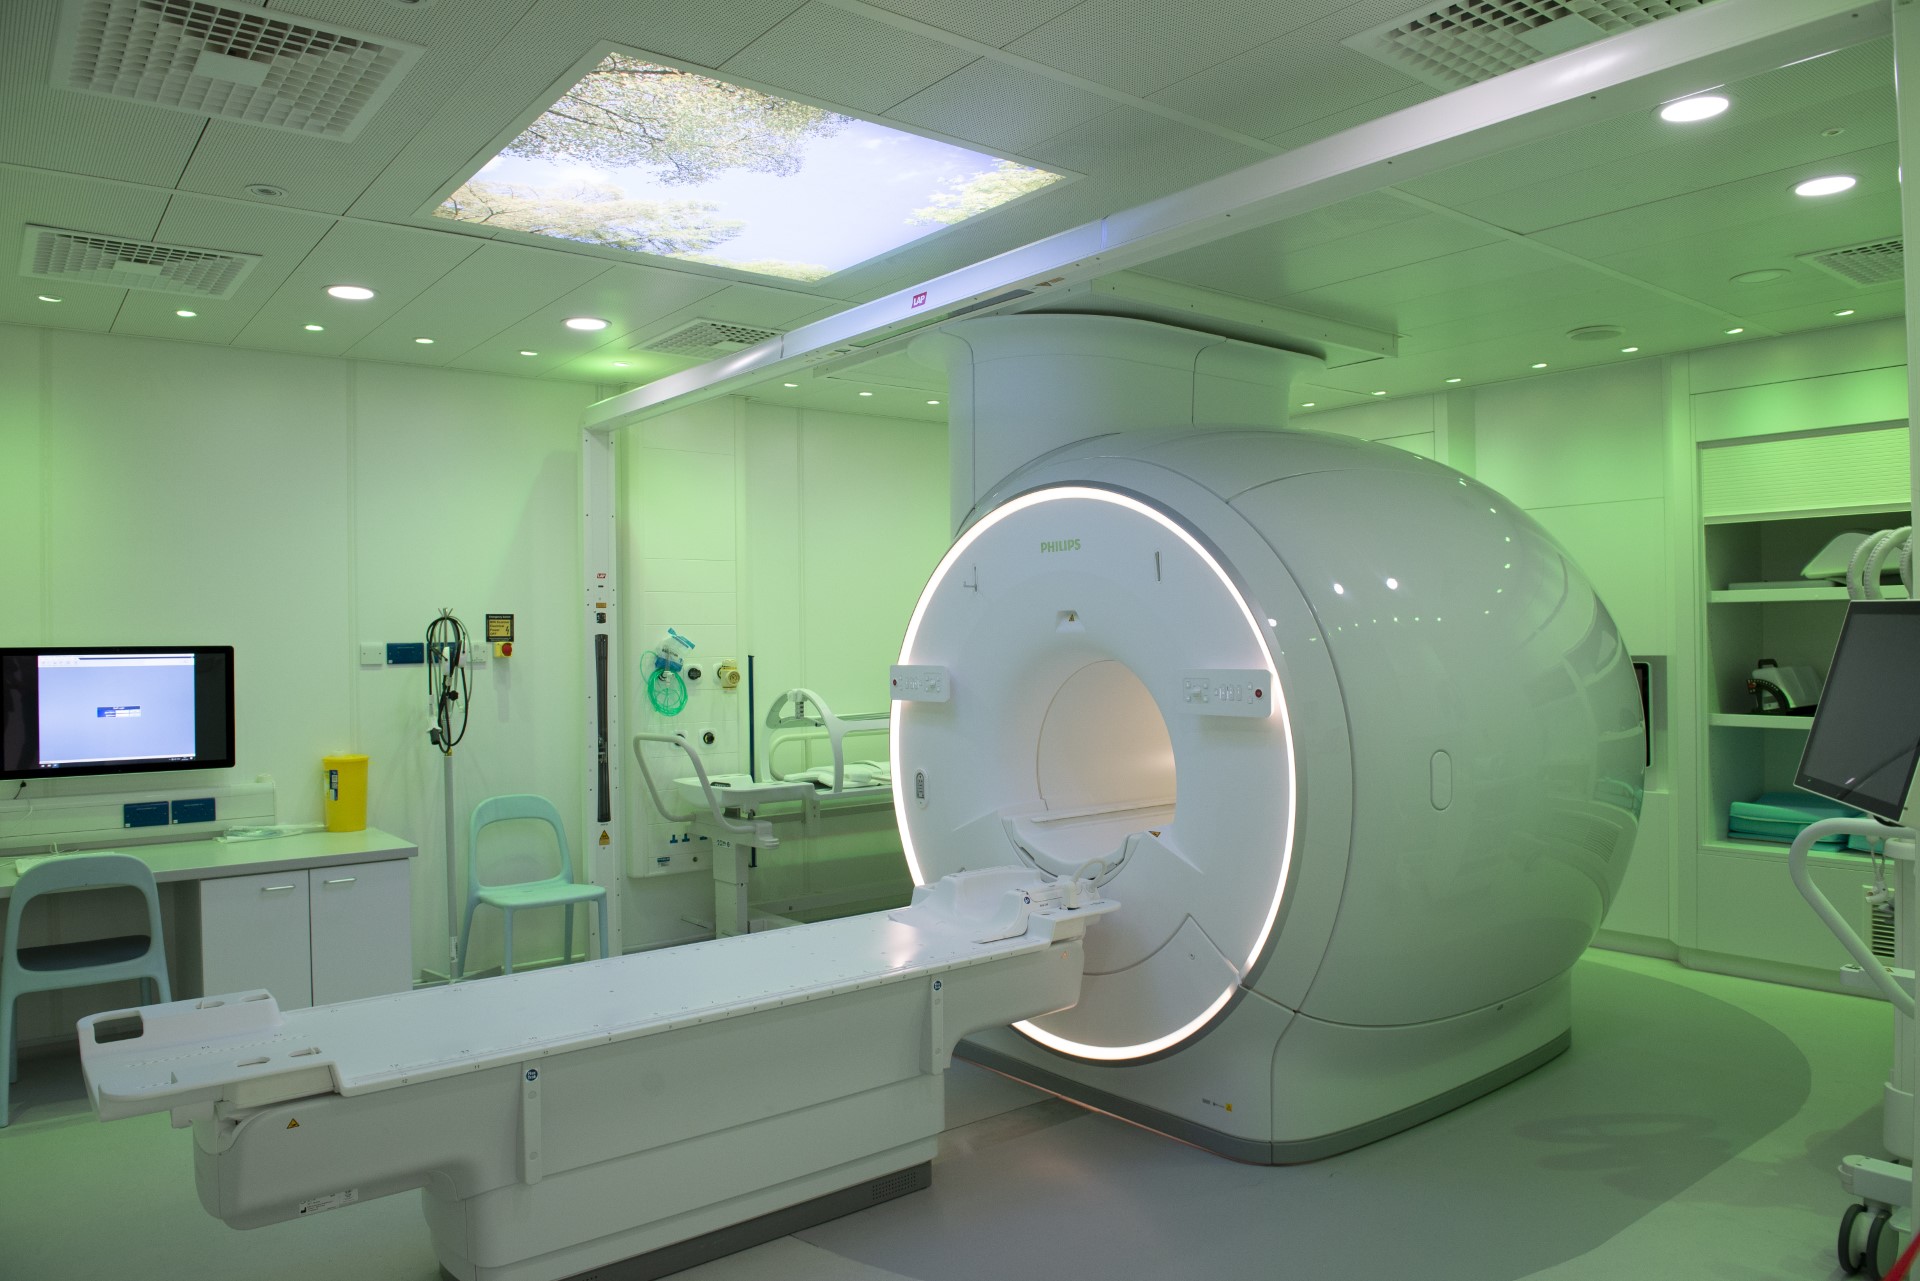 Image shows the new Philips MRI simulator situated in Leeds Hospital. There is a large MRI machine in white surrounded by green lighting in a hospital room.